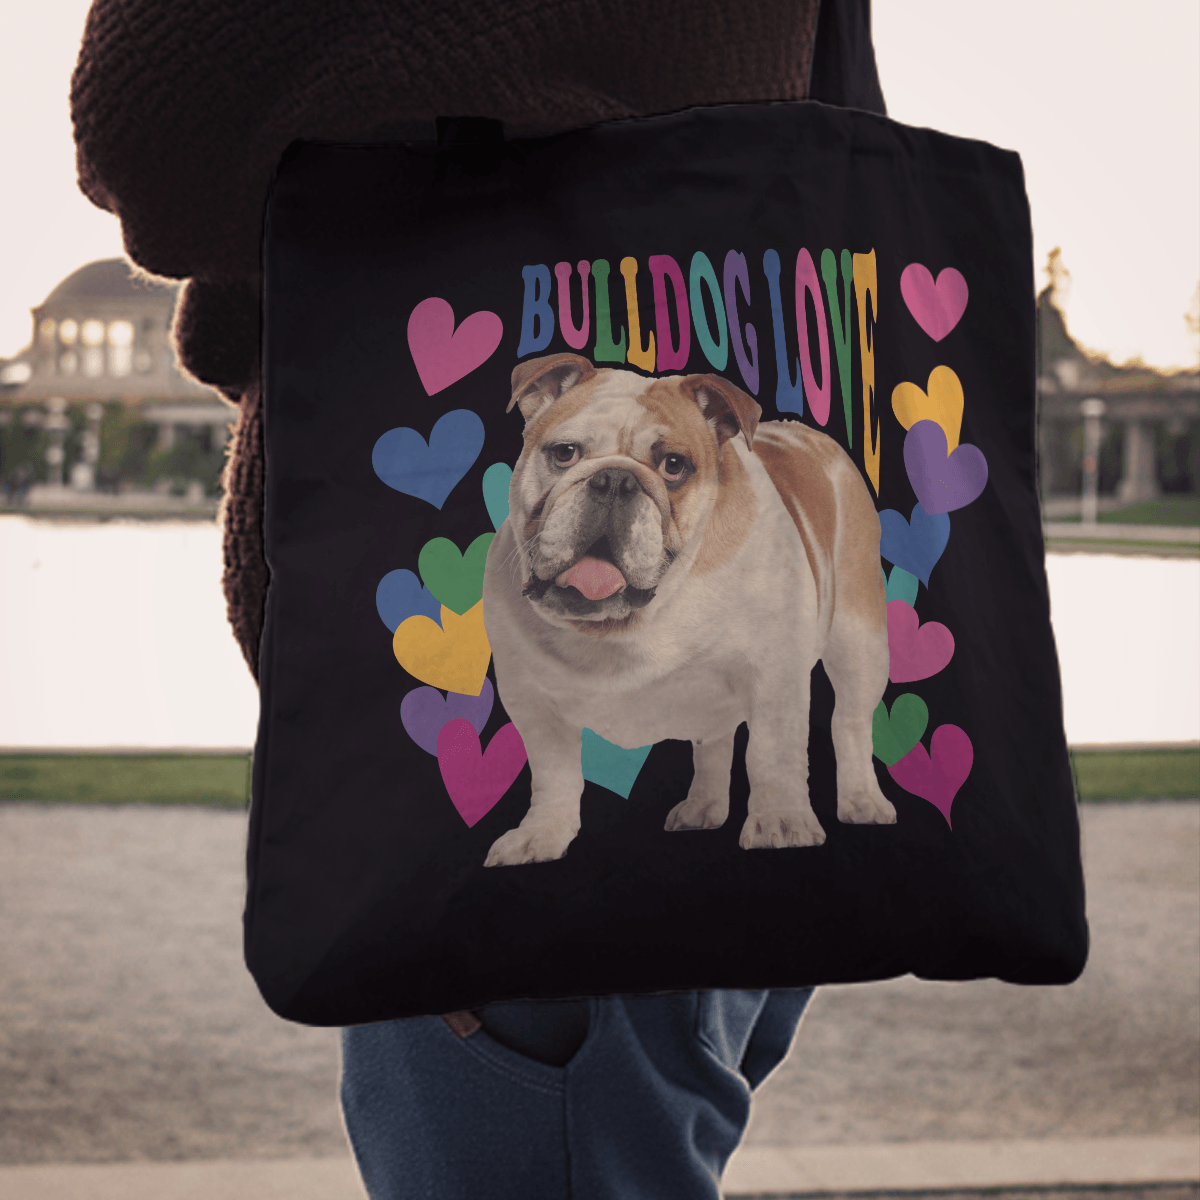 Designs by MyUtopia Shout Out:Bulldog Love Fabric Totebag Reusable Shopping Tote